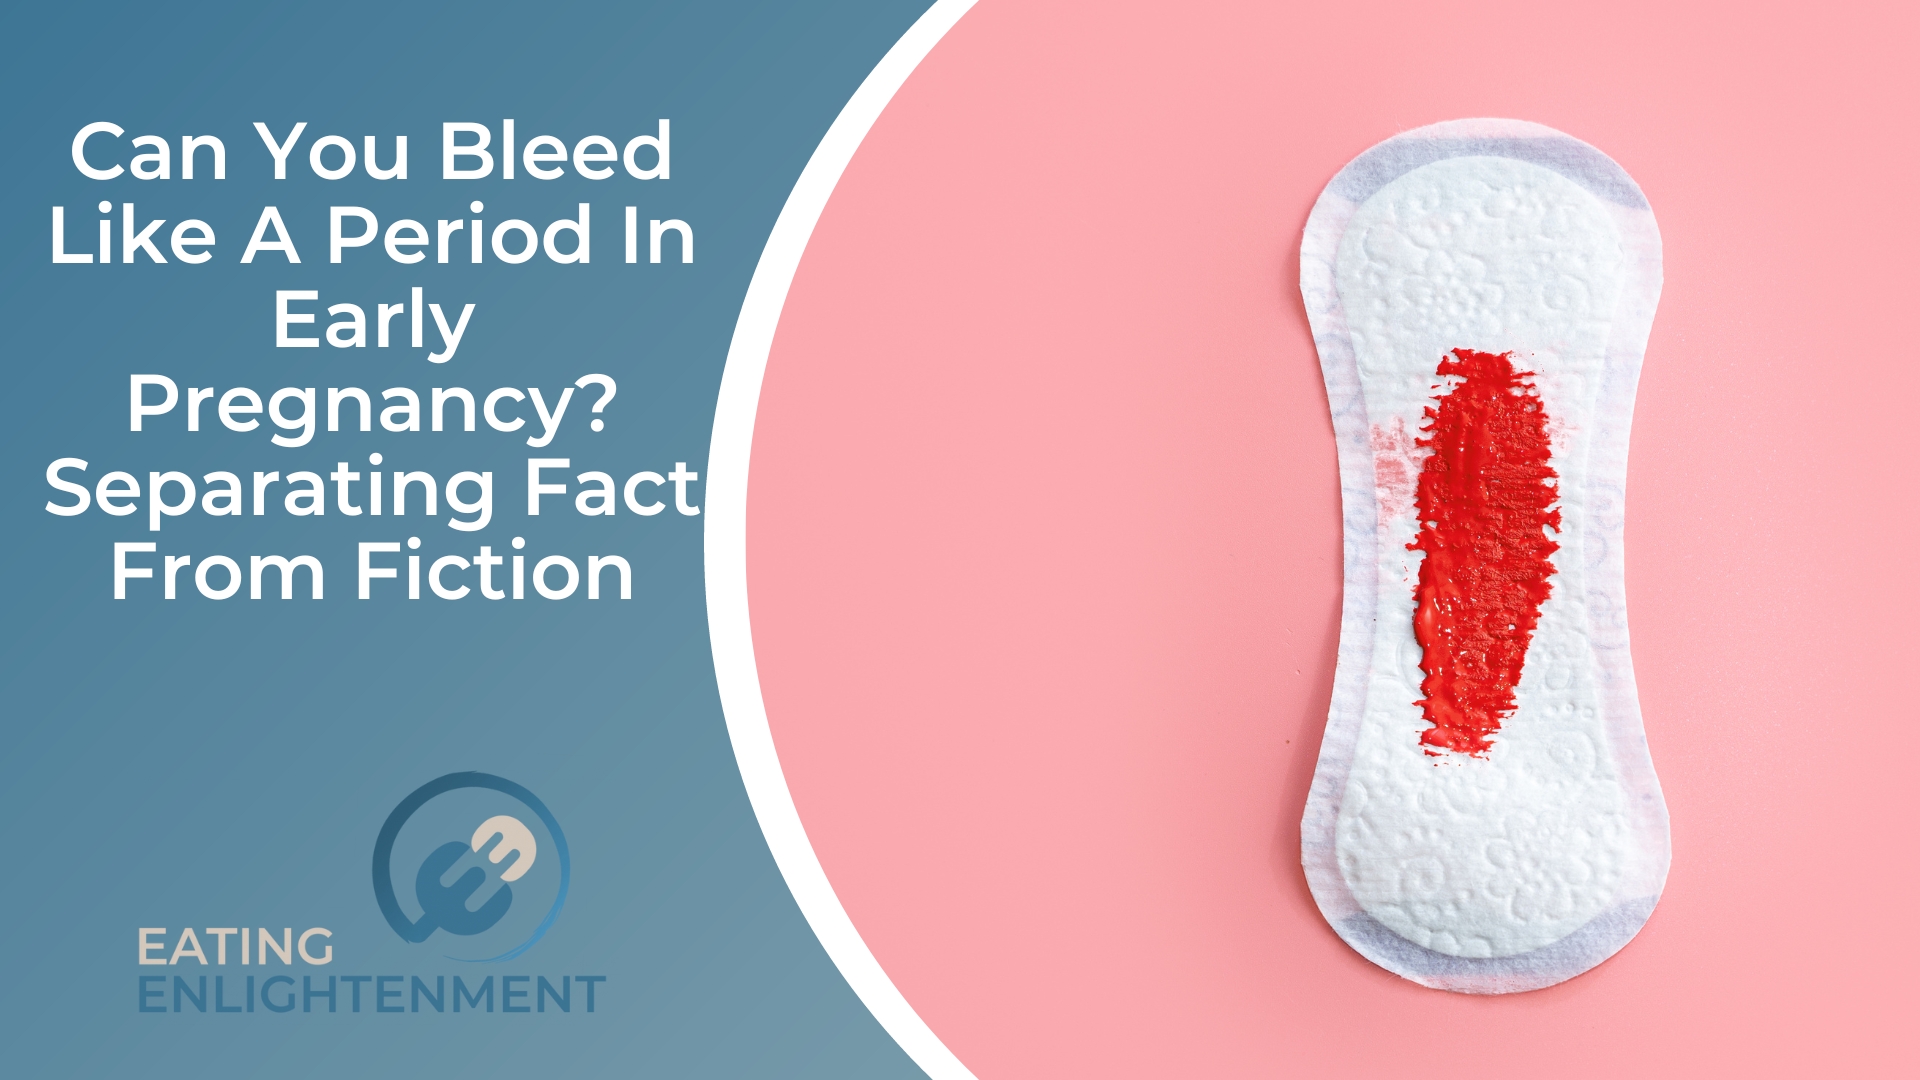 Can You Bleed Like A Period In Early Pregnancy Separating Fact From Fiction